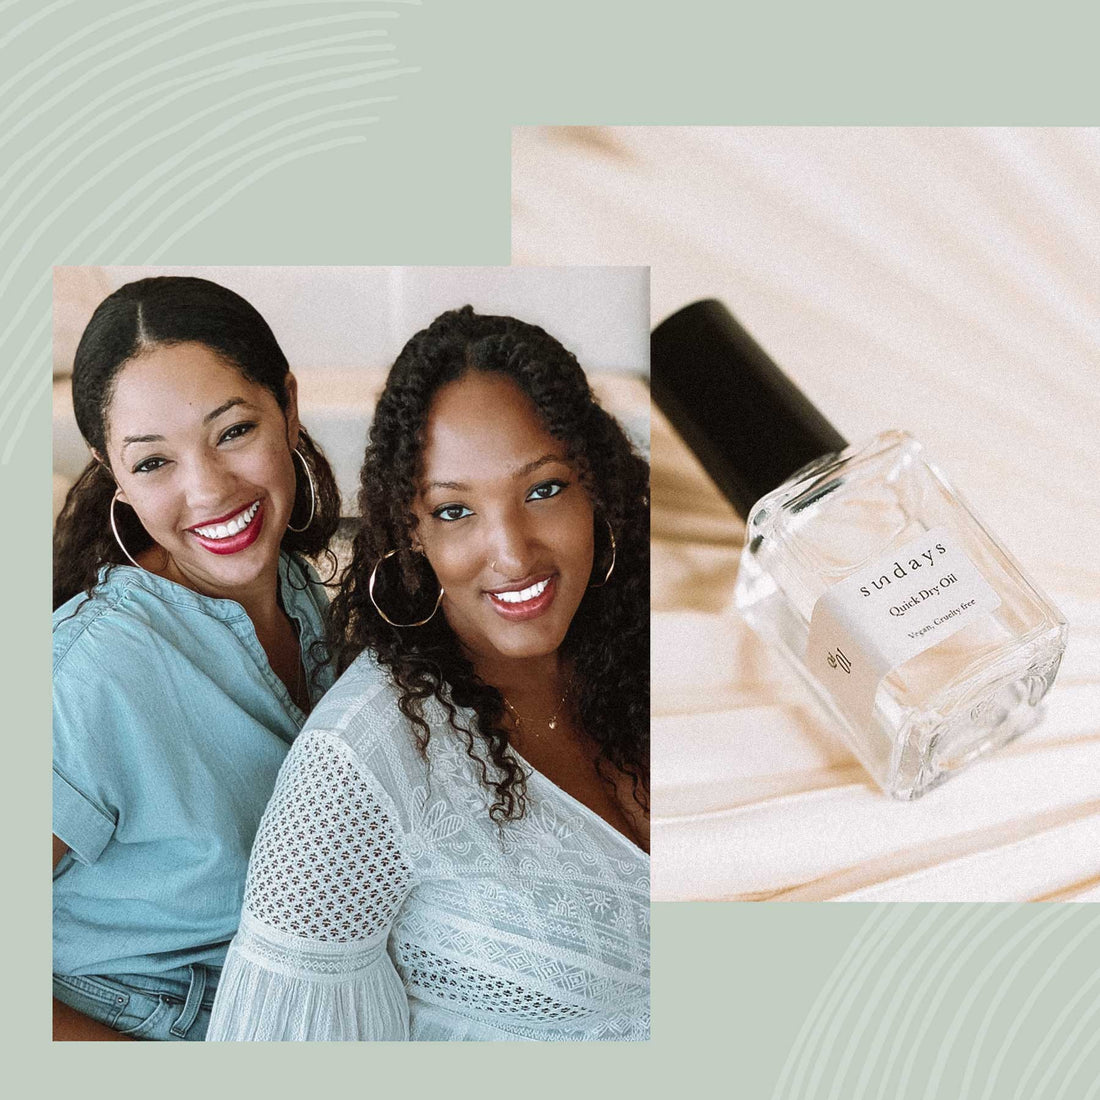 6 Women-Owned Wellness Brands & Products You Needed to Have Like Yesterday